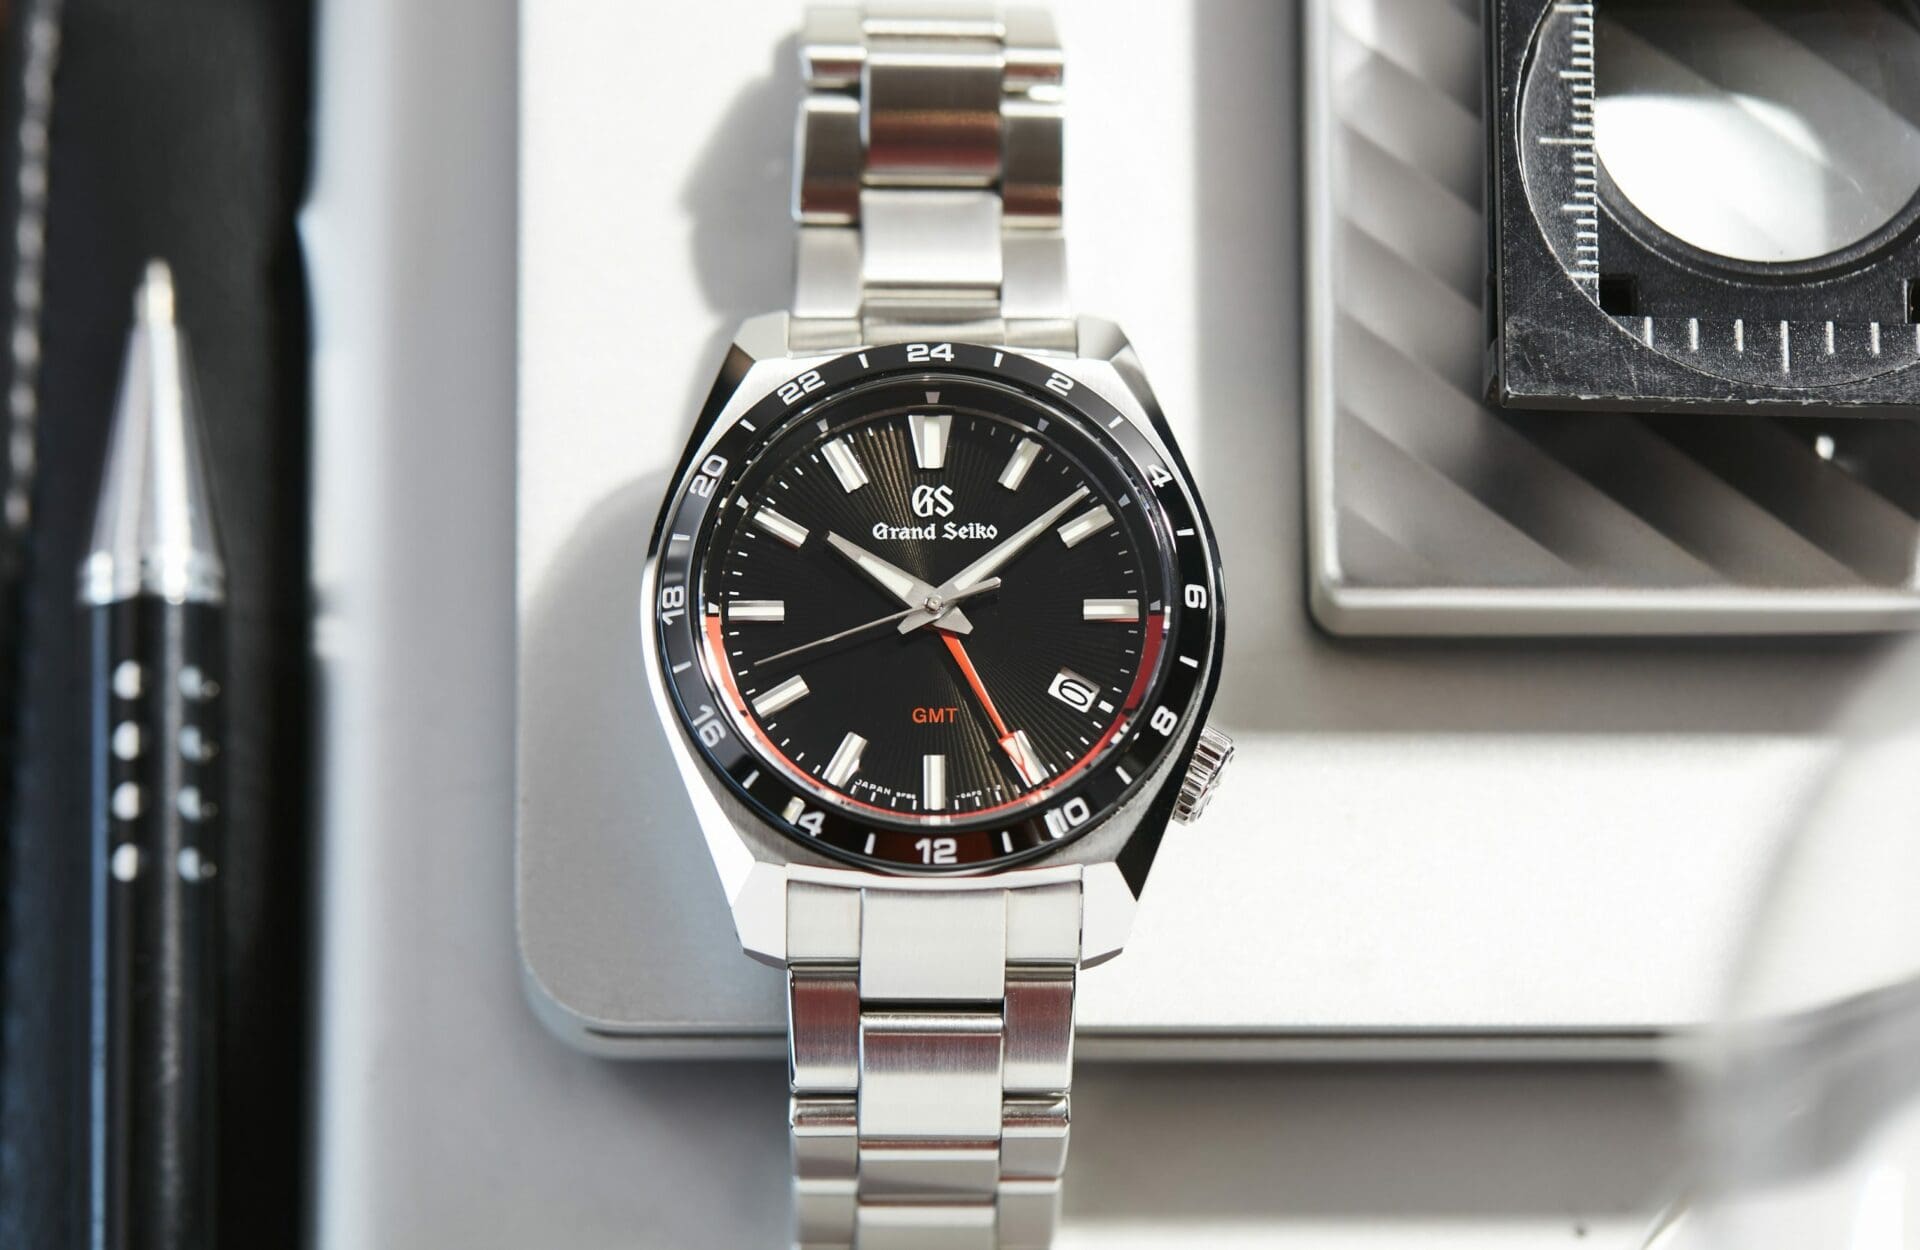 VIDEO: Everything you need in a watch from the Grand Seiko SBGN019 and SBGN021